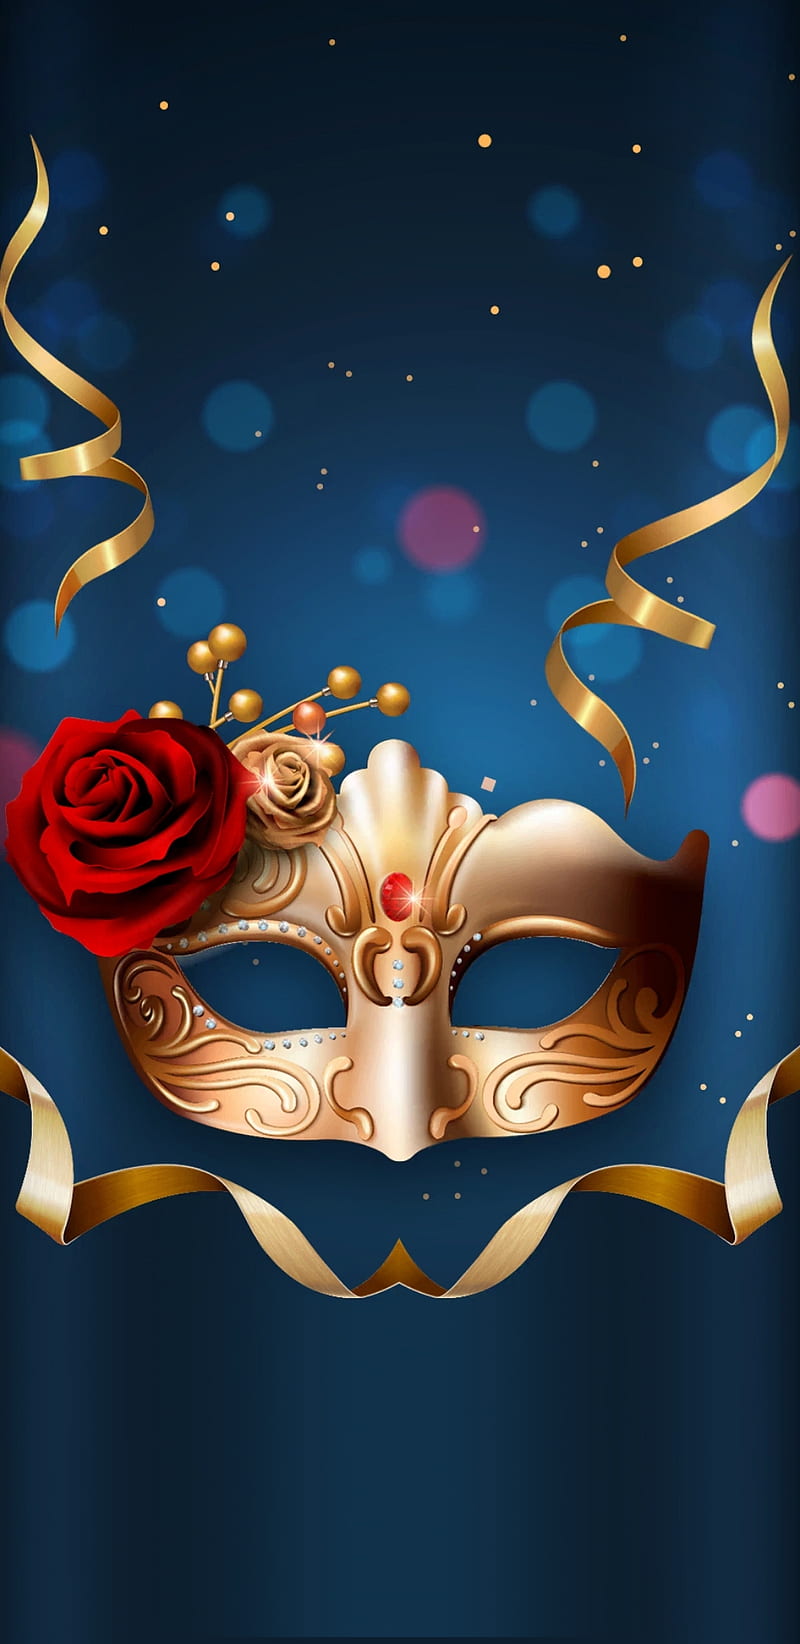 MasqueradeParty, ball, masquerade, party, mysterious, rose, gold, golden, HD phone wallpaper